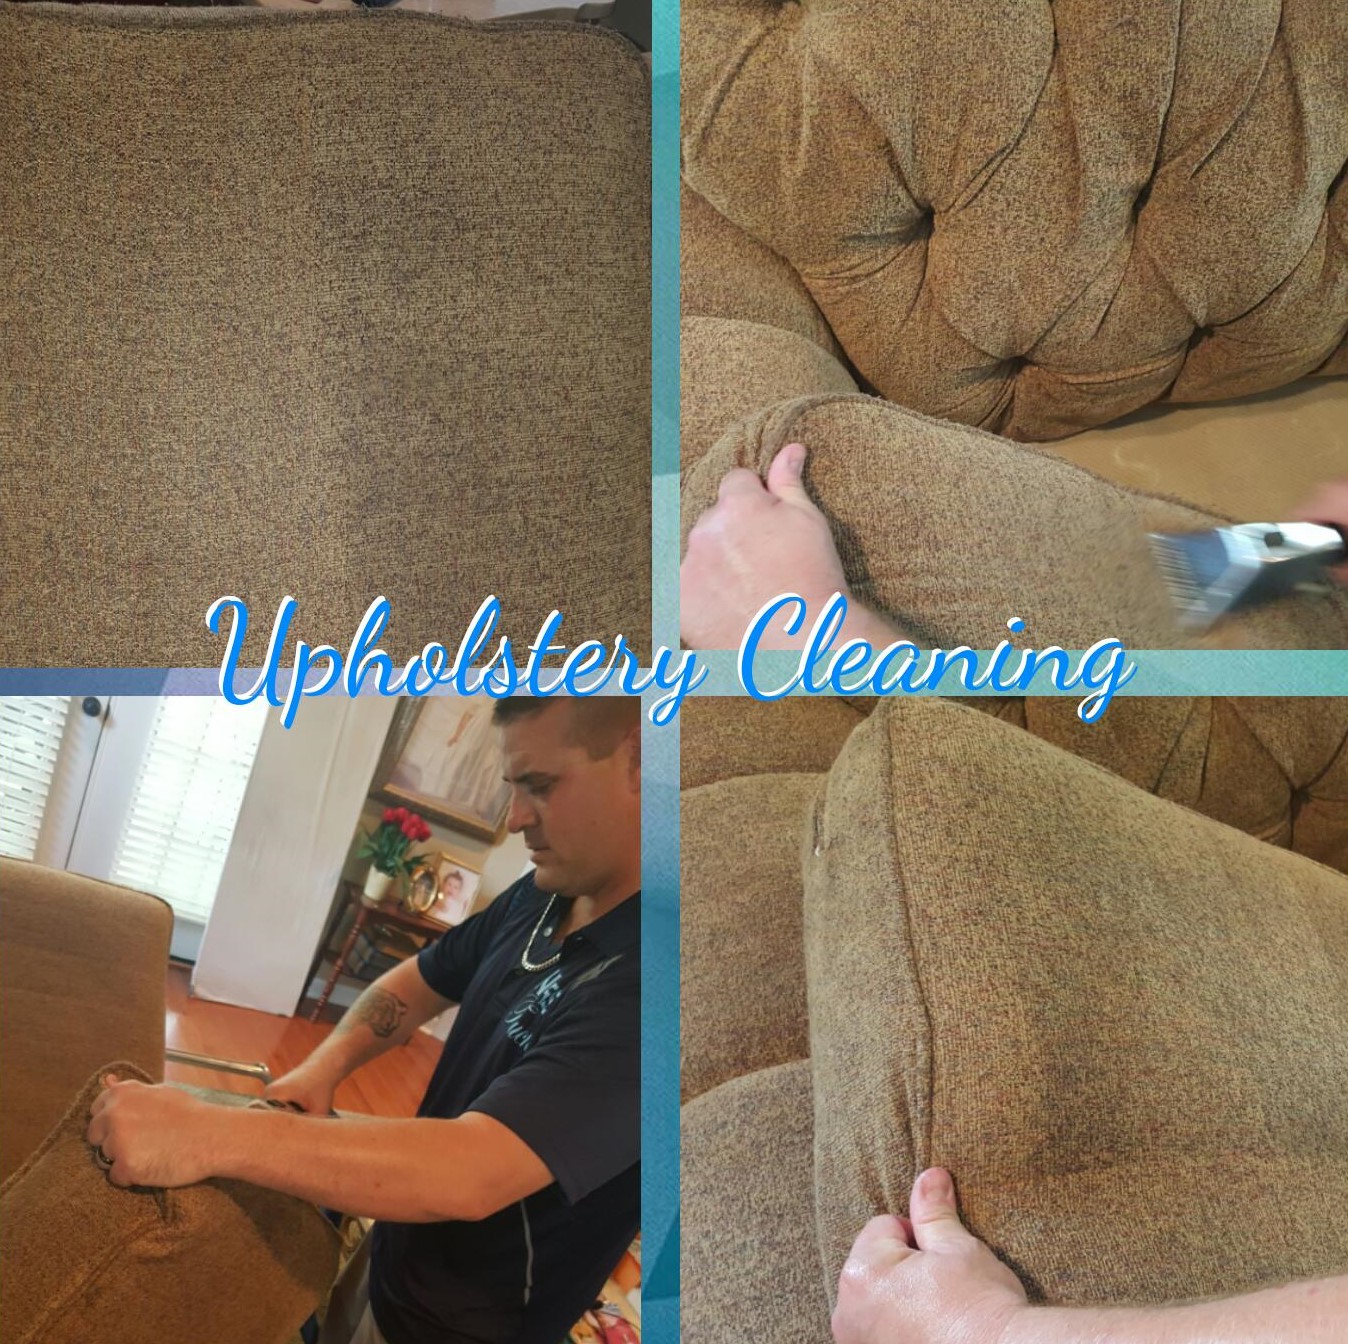 Top upholstery cleaning company in mobile, al